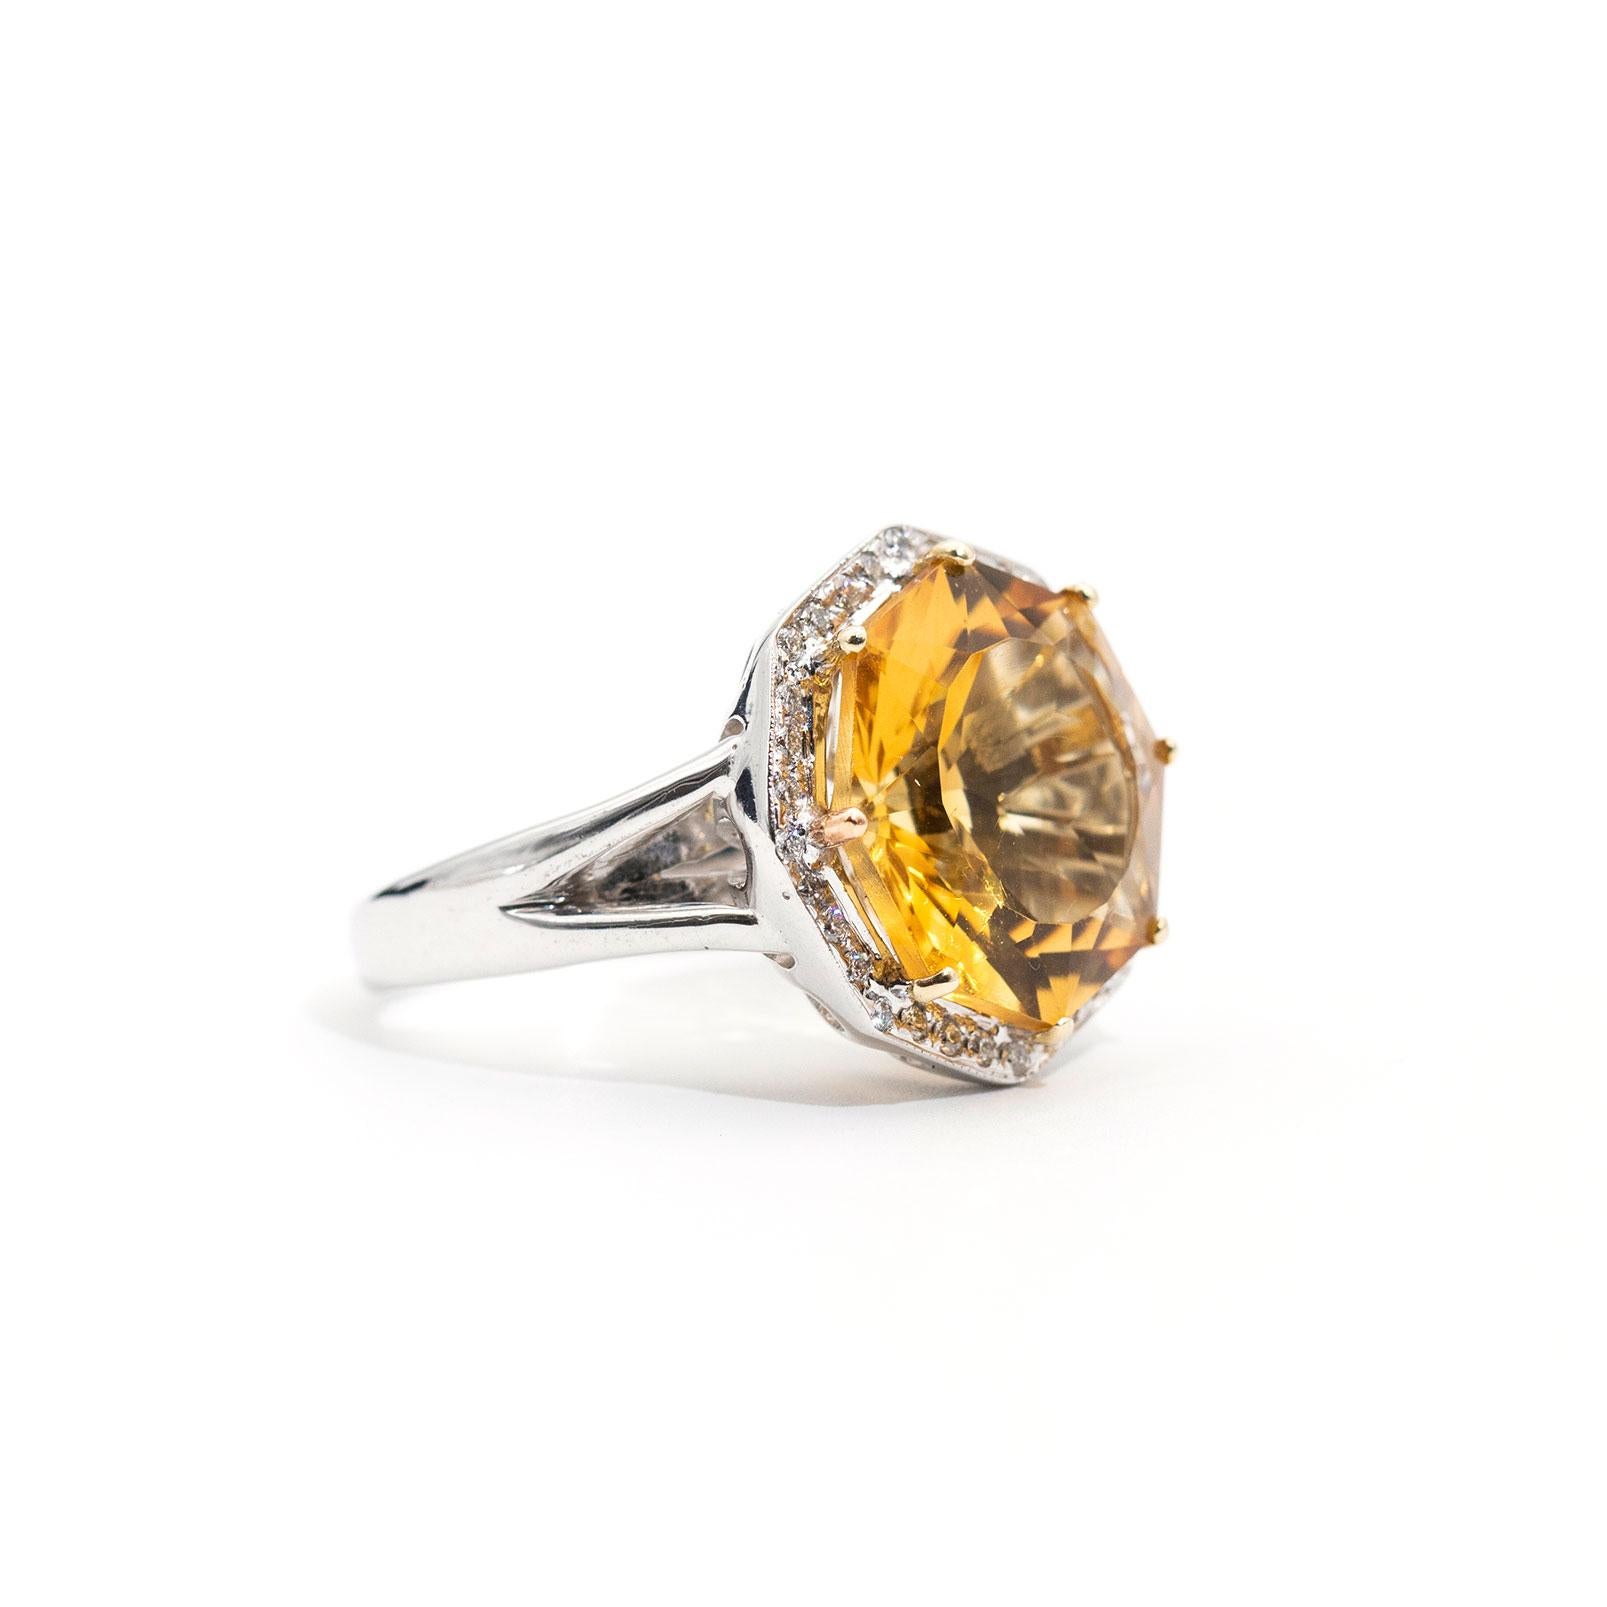 This luscious ring is forged in 18 carat white gold and boasts an amazing octagonal cut Citrine bordered by shining round brilliant cut diamonds. We have named this show-stopping piece The Mariana Ring. The Mariana Ring is perfectly proportioned and